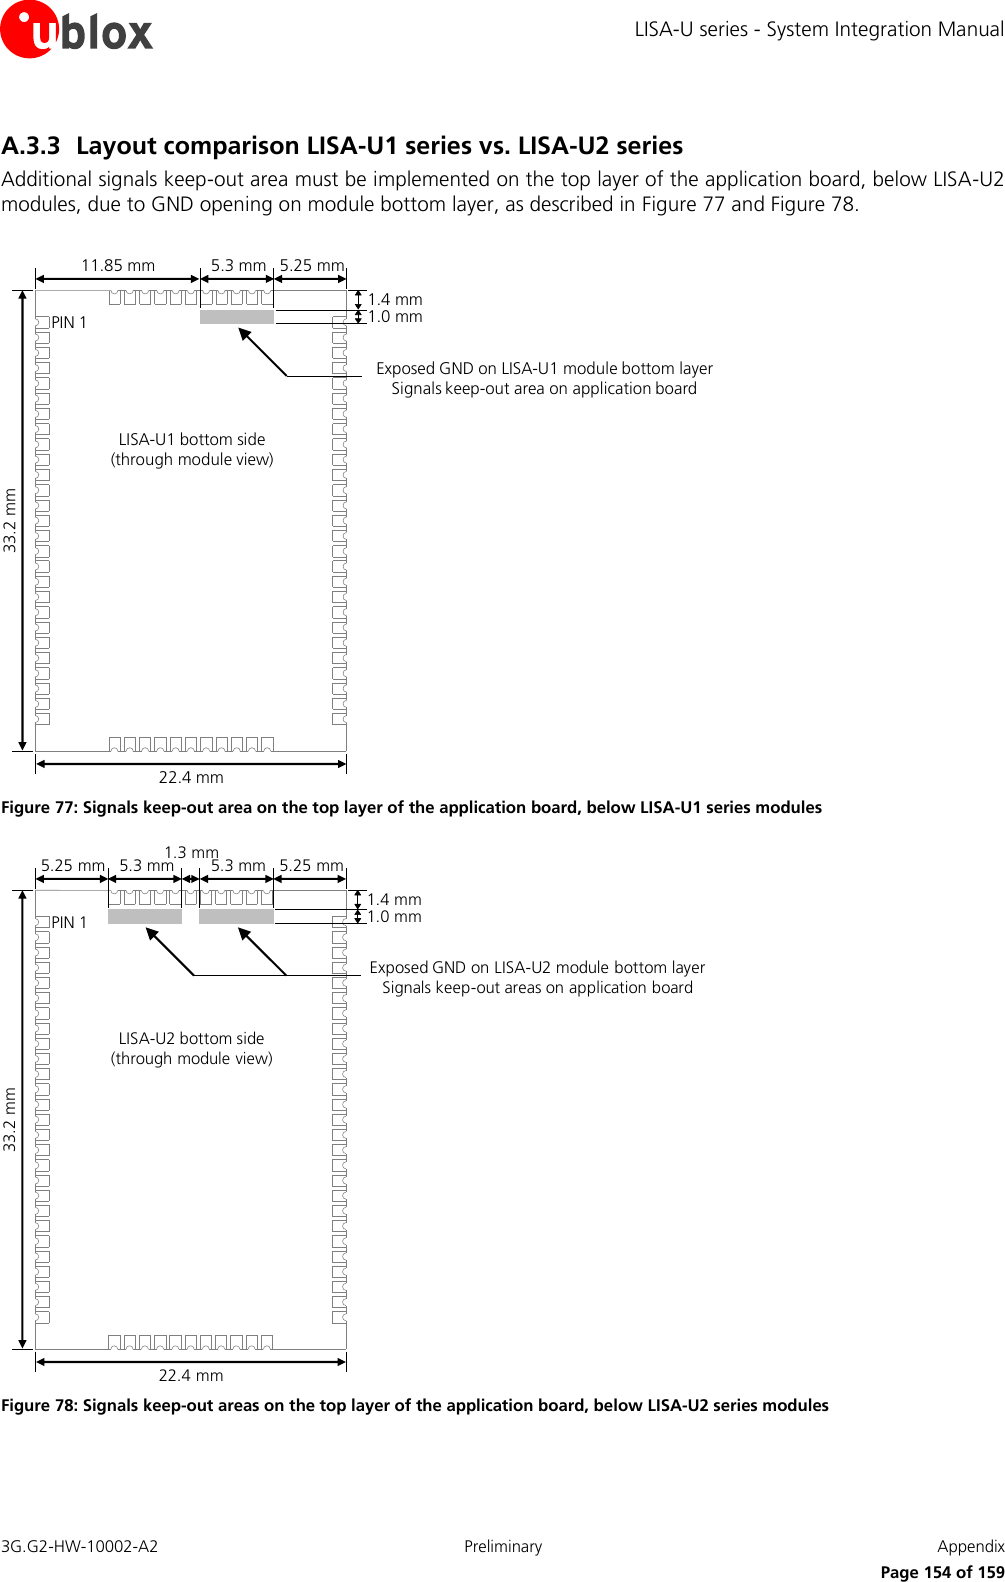 LISA-U series - System Integration Manual 3G.G2-HW-10002-A2  Preliminary  Appendix      Page 154 of 159 A.3.3 Layout comparison LISA-U1 series vs. LISA-U2 series Additional signals keep-out area must be implemented on the top layer of the application board, below LISA-U2 modules, due to GND opening on module bottom layer, as described in Figure 77 and Figure 78.  33.2 mm11.85 mm22.4 mm5.3 mm 5.25 mm1.4 mm1.0 mmPIN 1LISA-U1 bottom side (through module view)Exposed GND on LISA-U1 module bottom layerSignals keep-out area on application board Figure 77: Signals keep-out area on the top layer of the application board, below LISA-U1 series modules 33.2 mm5.25 mm22.4 mm5.3 mm 5.25 mm5.3 mm1.3 mm1.4 mm1.0 mmPIN 1LISA-U2 bottom side (through module view)Exposed GND on LISA-U2 module bottom layerSignals keep-out areas on application board Figure 78: Signals keep-out areas on the top layer of the application board, below LISA-U2 series modules  